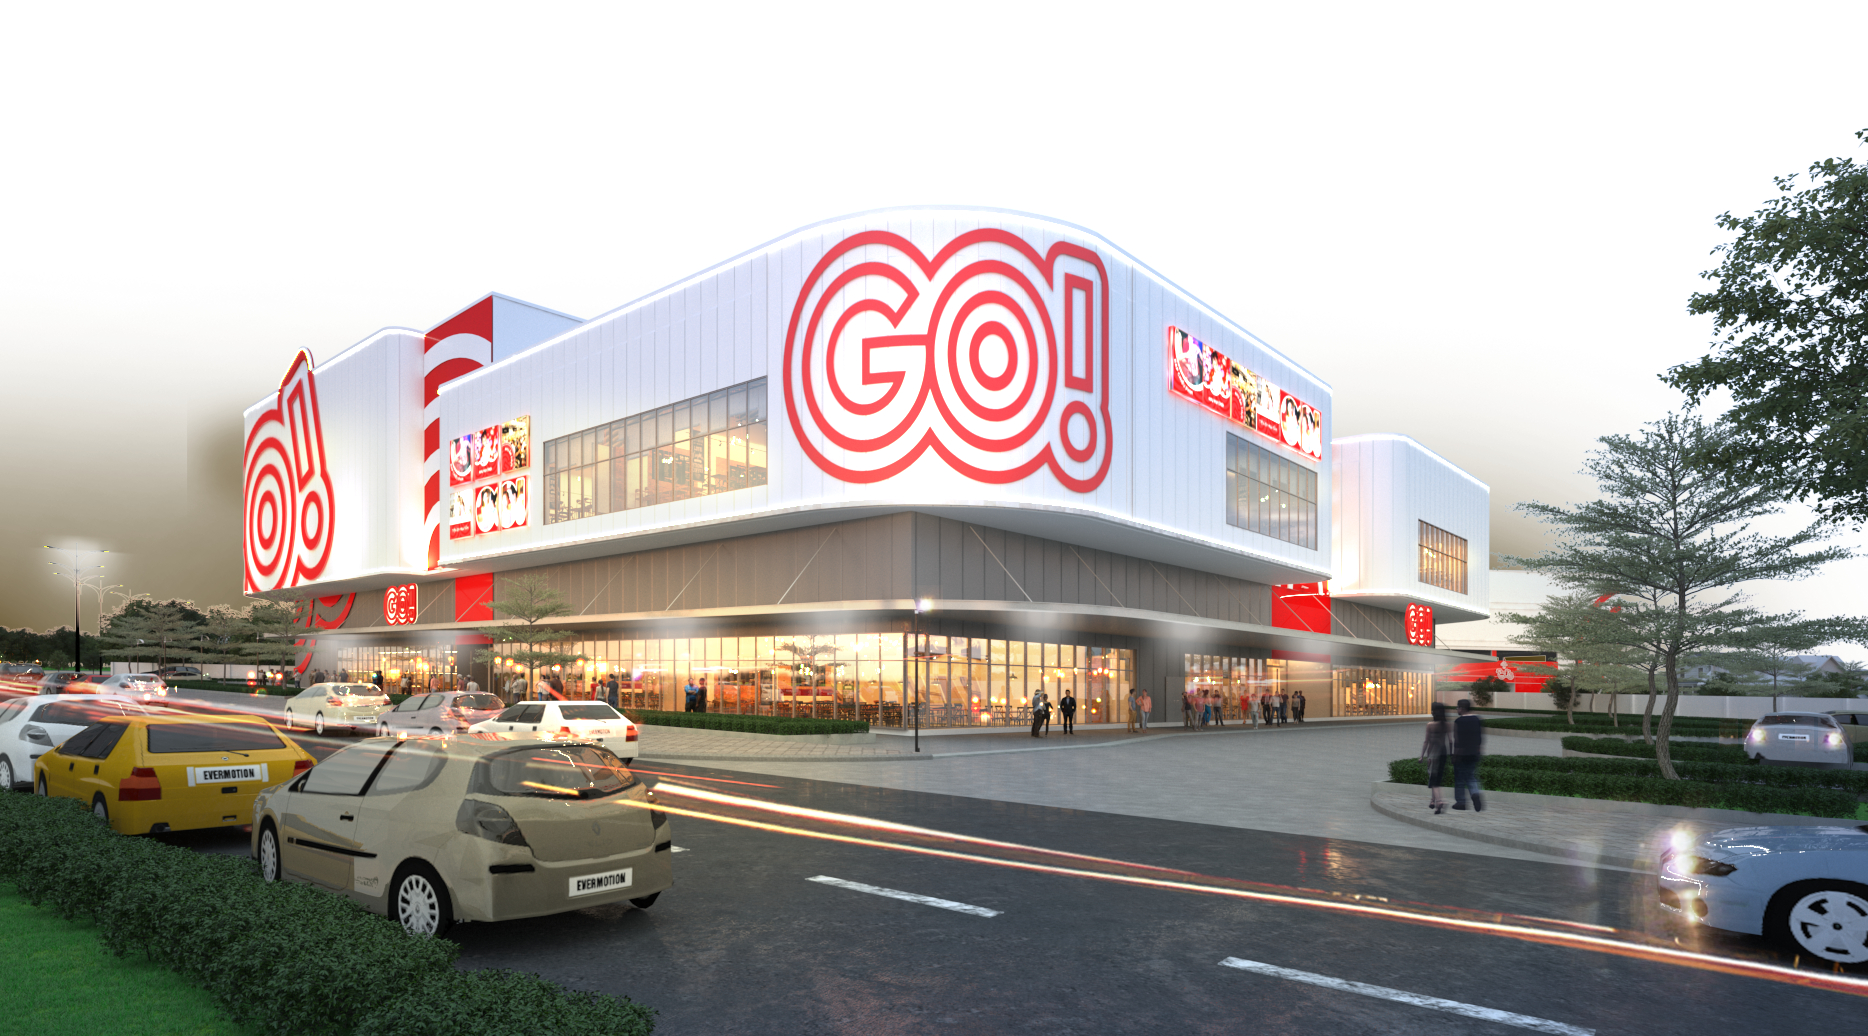 “GO! THAI BINH COMMERCIAL CENTER” – PROJECT INFORMATION